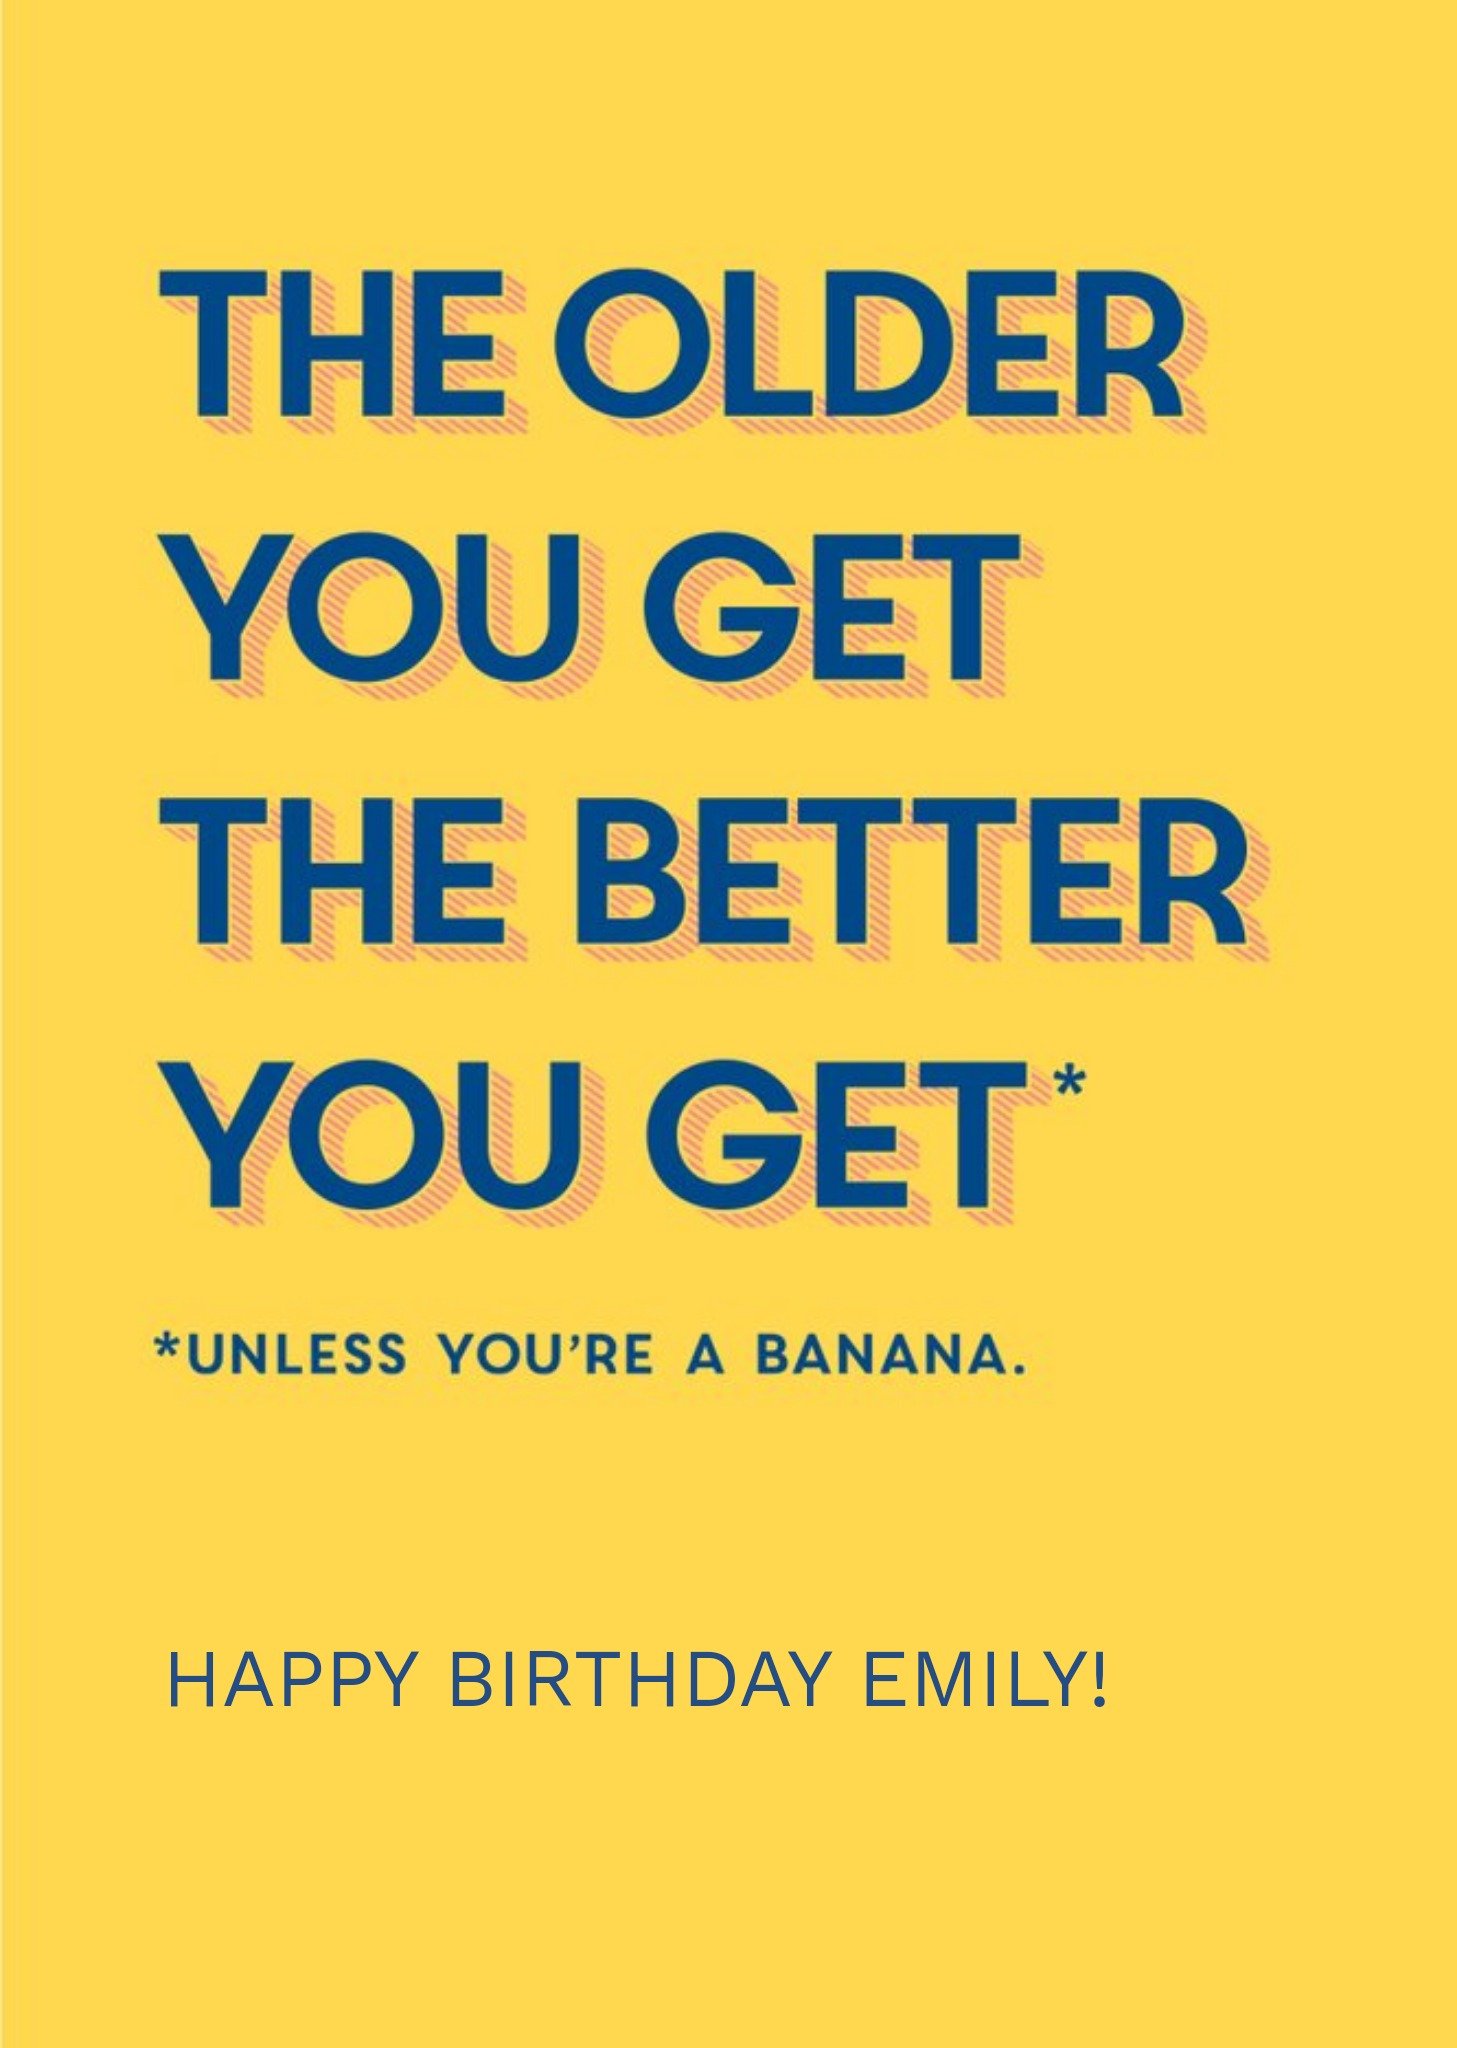 Moonpig The Older You Get The Better You Get Funny Birthday Card, Large